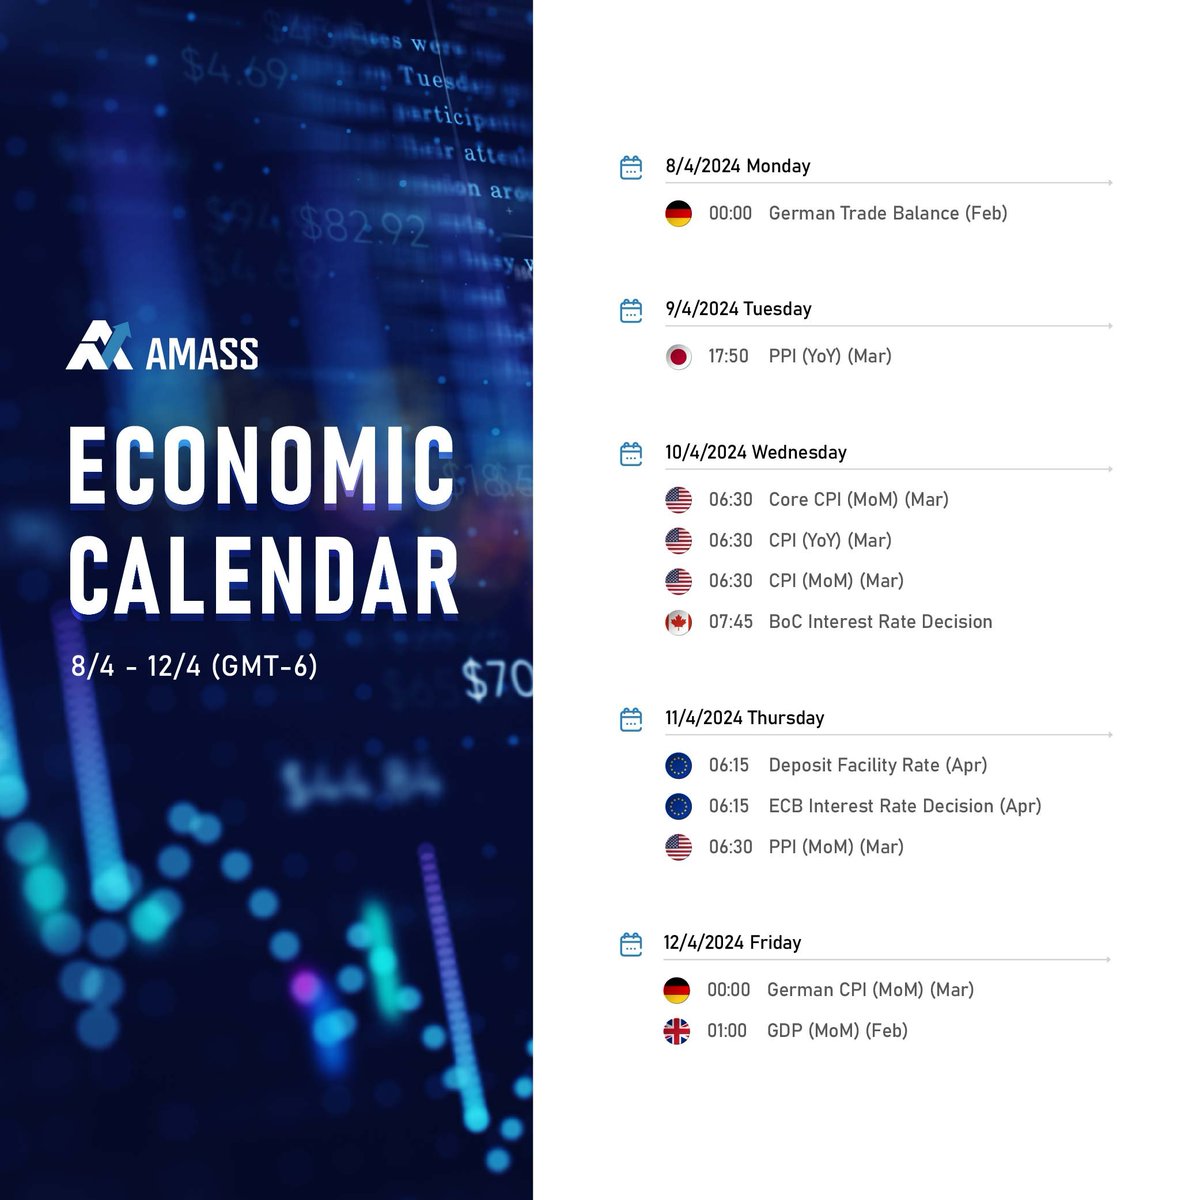 Check out this week's #EconomicCalendar for important market events 🗓

#AMASS #AMIC #assetmanagementcorp #assetmanagement #funds #hedgefunds #hedgefundlife #hedgefundmogul #blockchain #cryptocurrency #liquiditypool #binaryoptions #copytrading